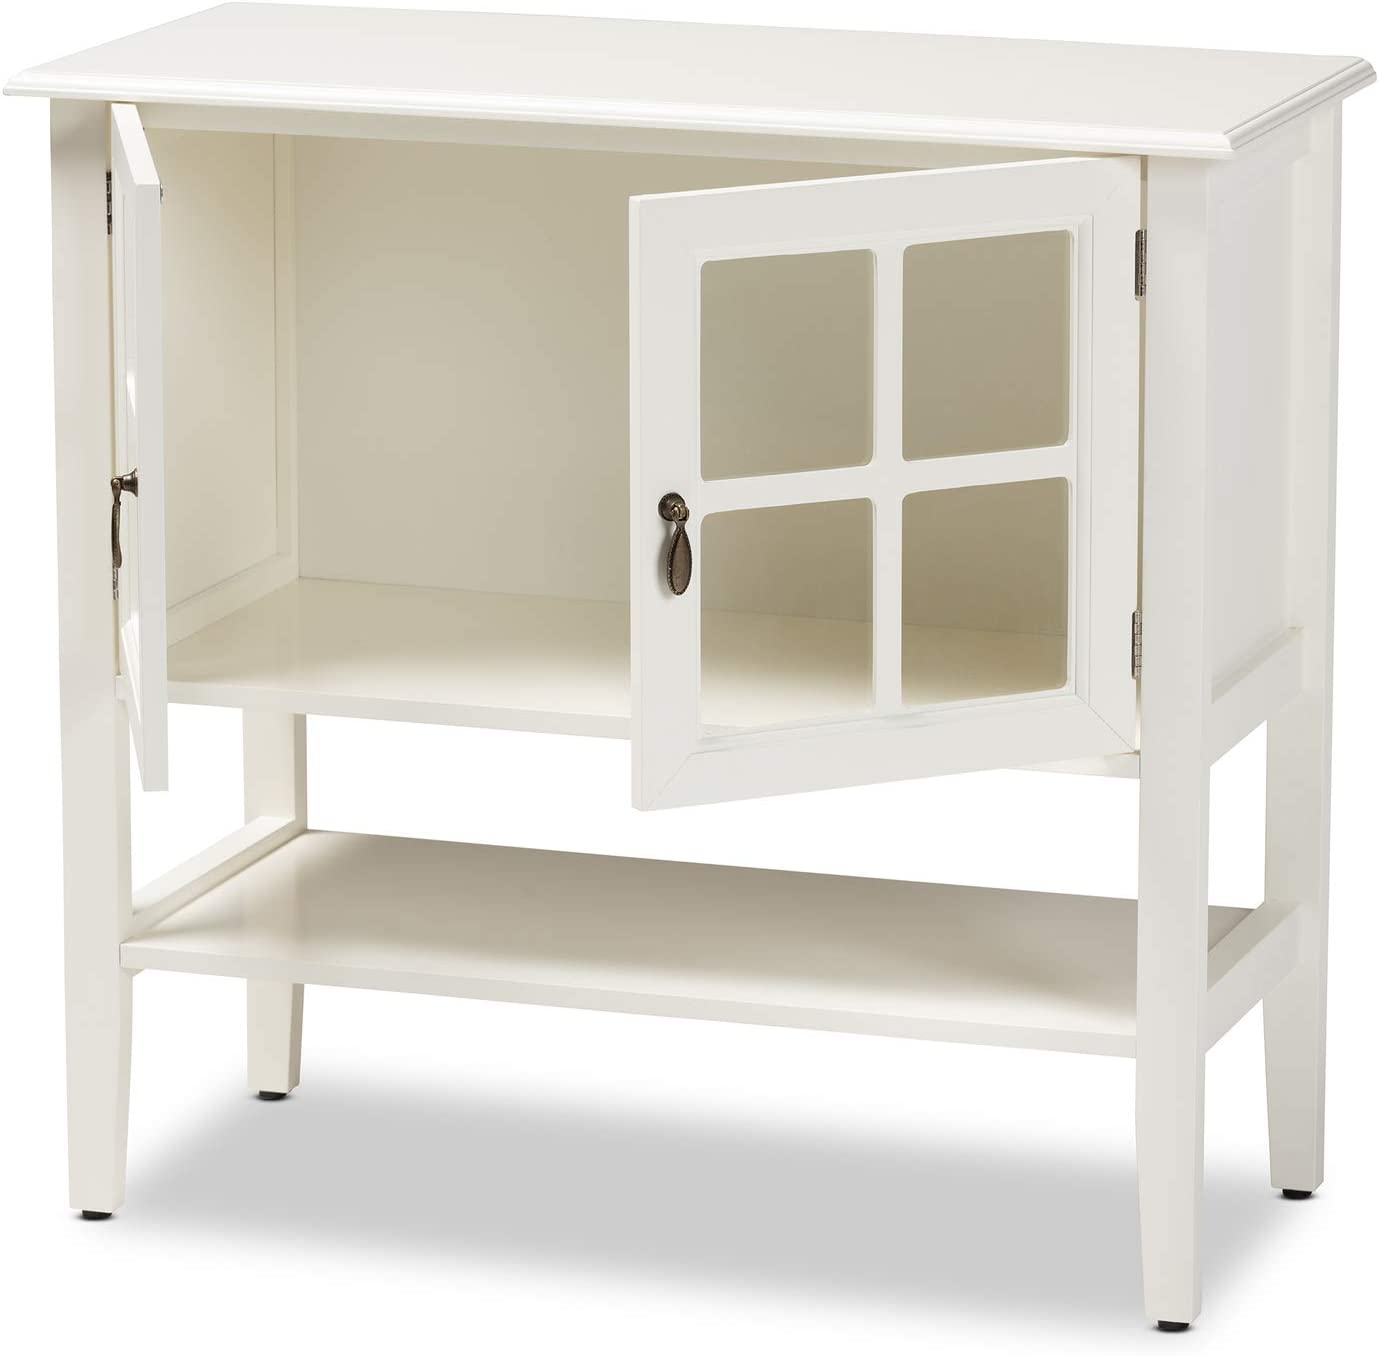 Baxton Studio Chauncey Classic and Traditional White Finished Wood and Glass 2-Door Kitchen Storage Cabinet